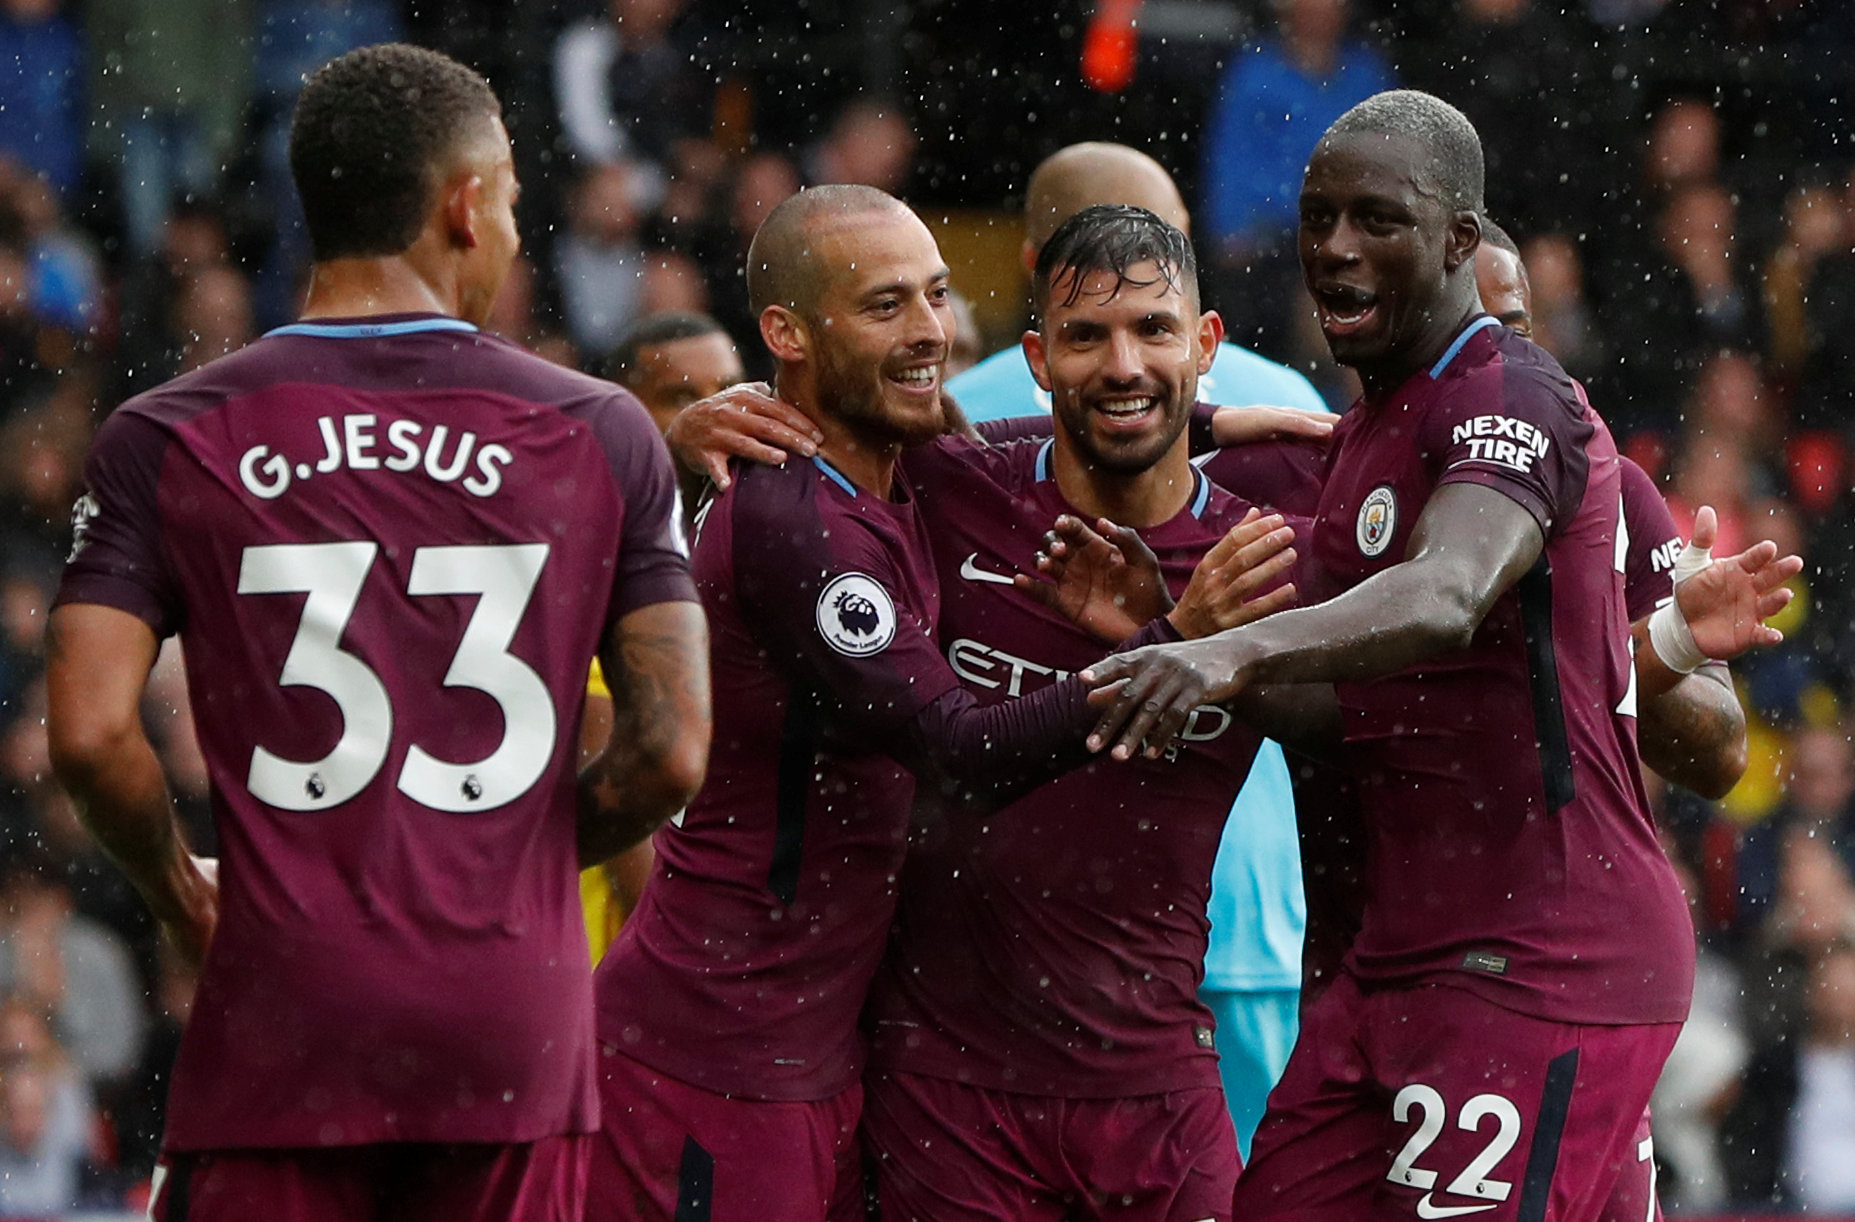 Football: Aguero scores hat-trick as Man City go top with 6-0 win over Watford